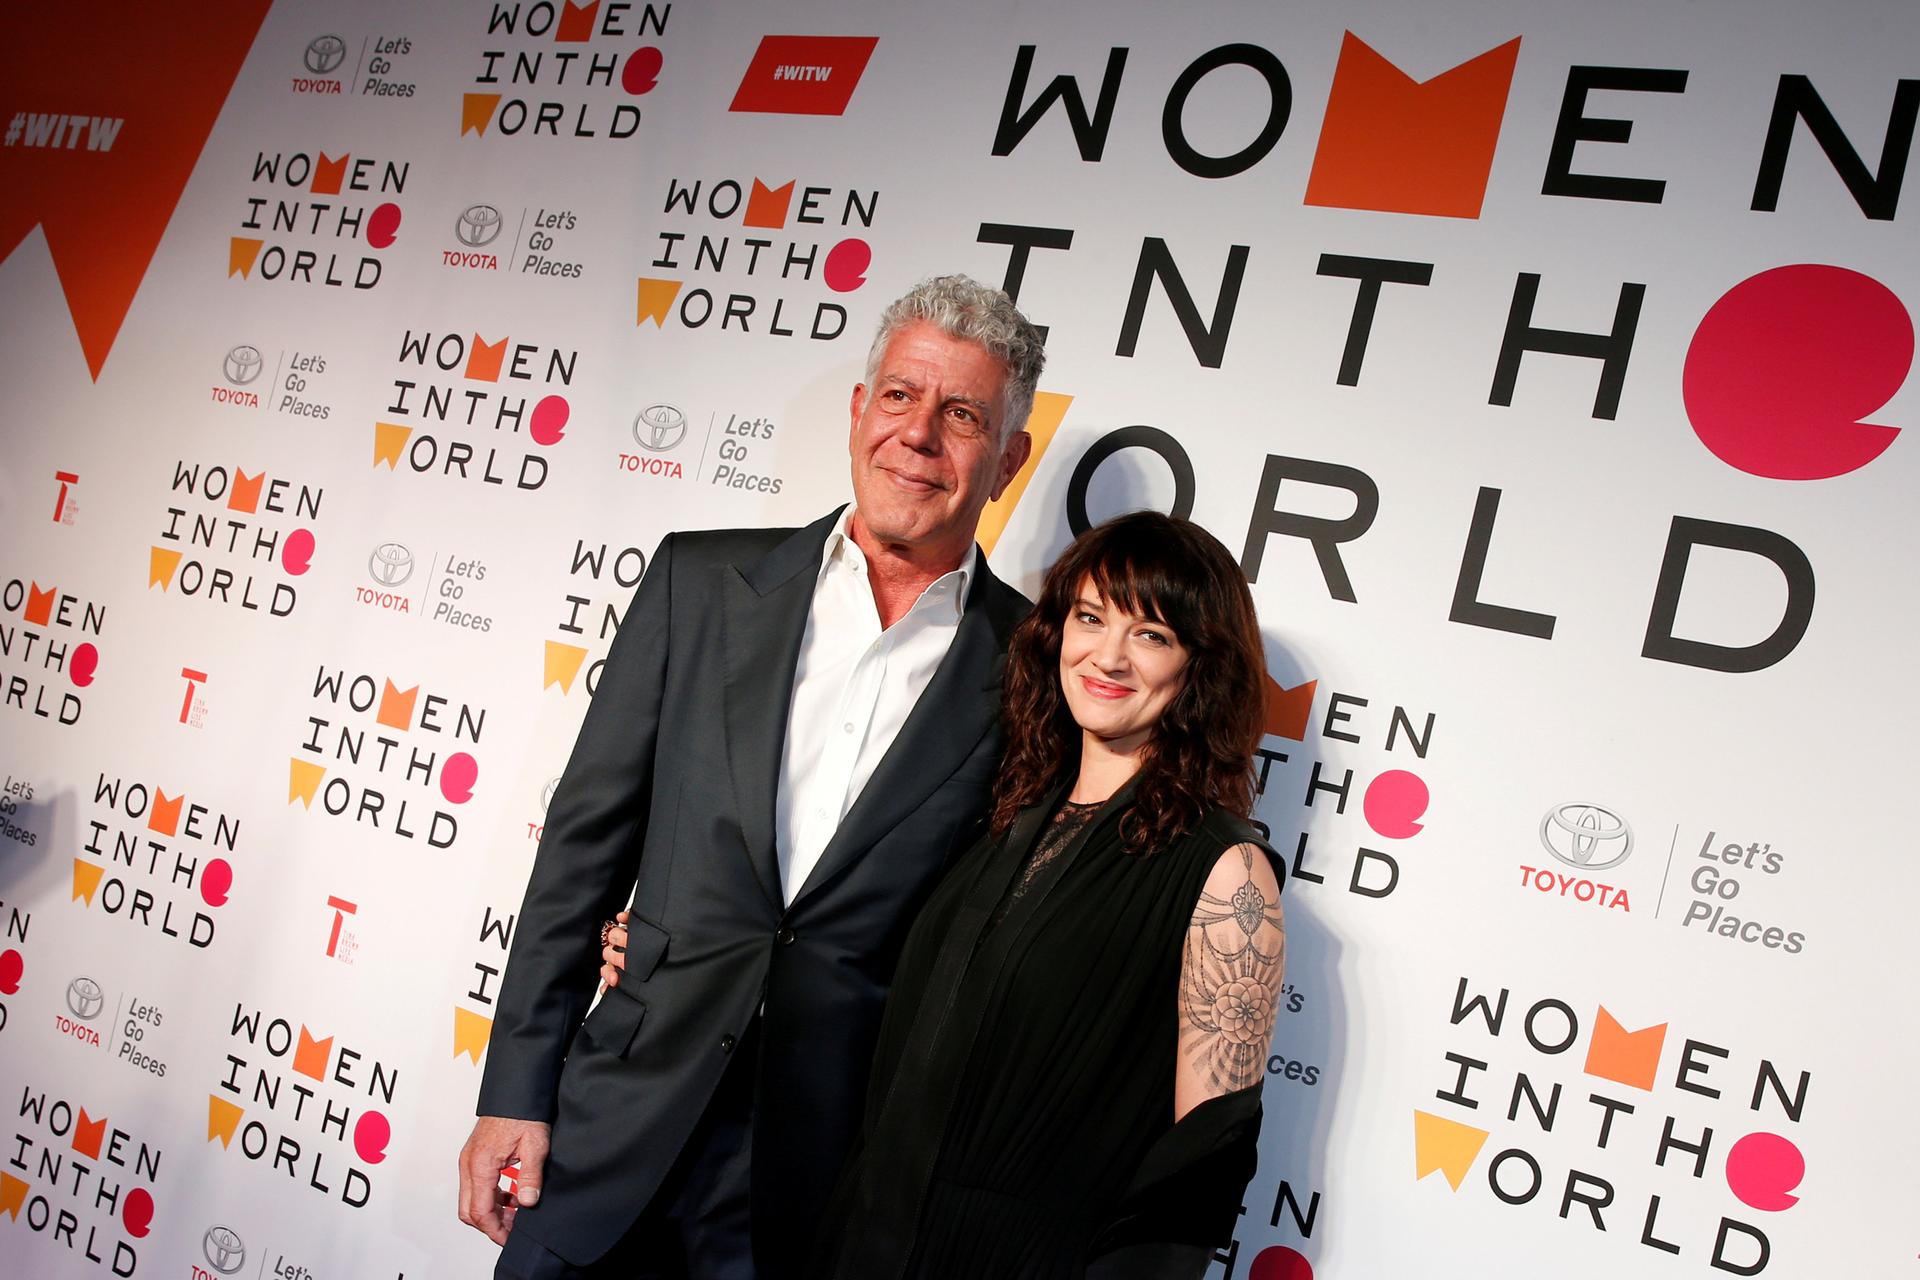 Anthony Bourdain poses with Italian actor and director Asia Argento